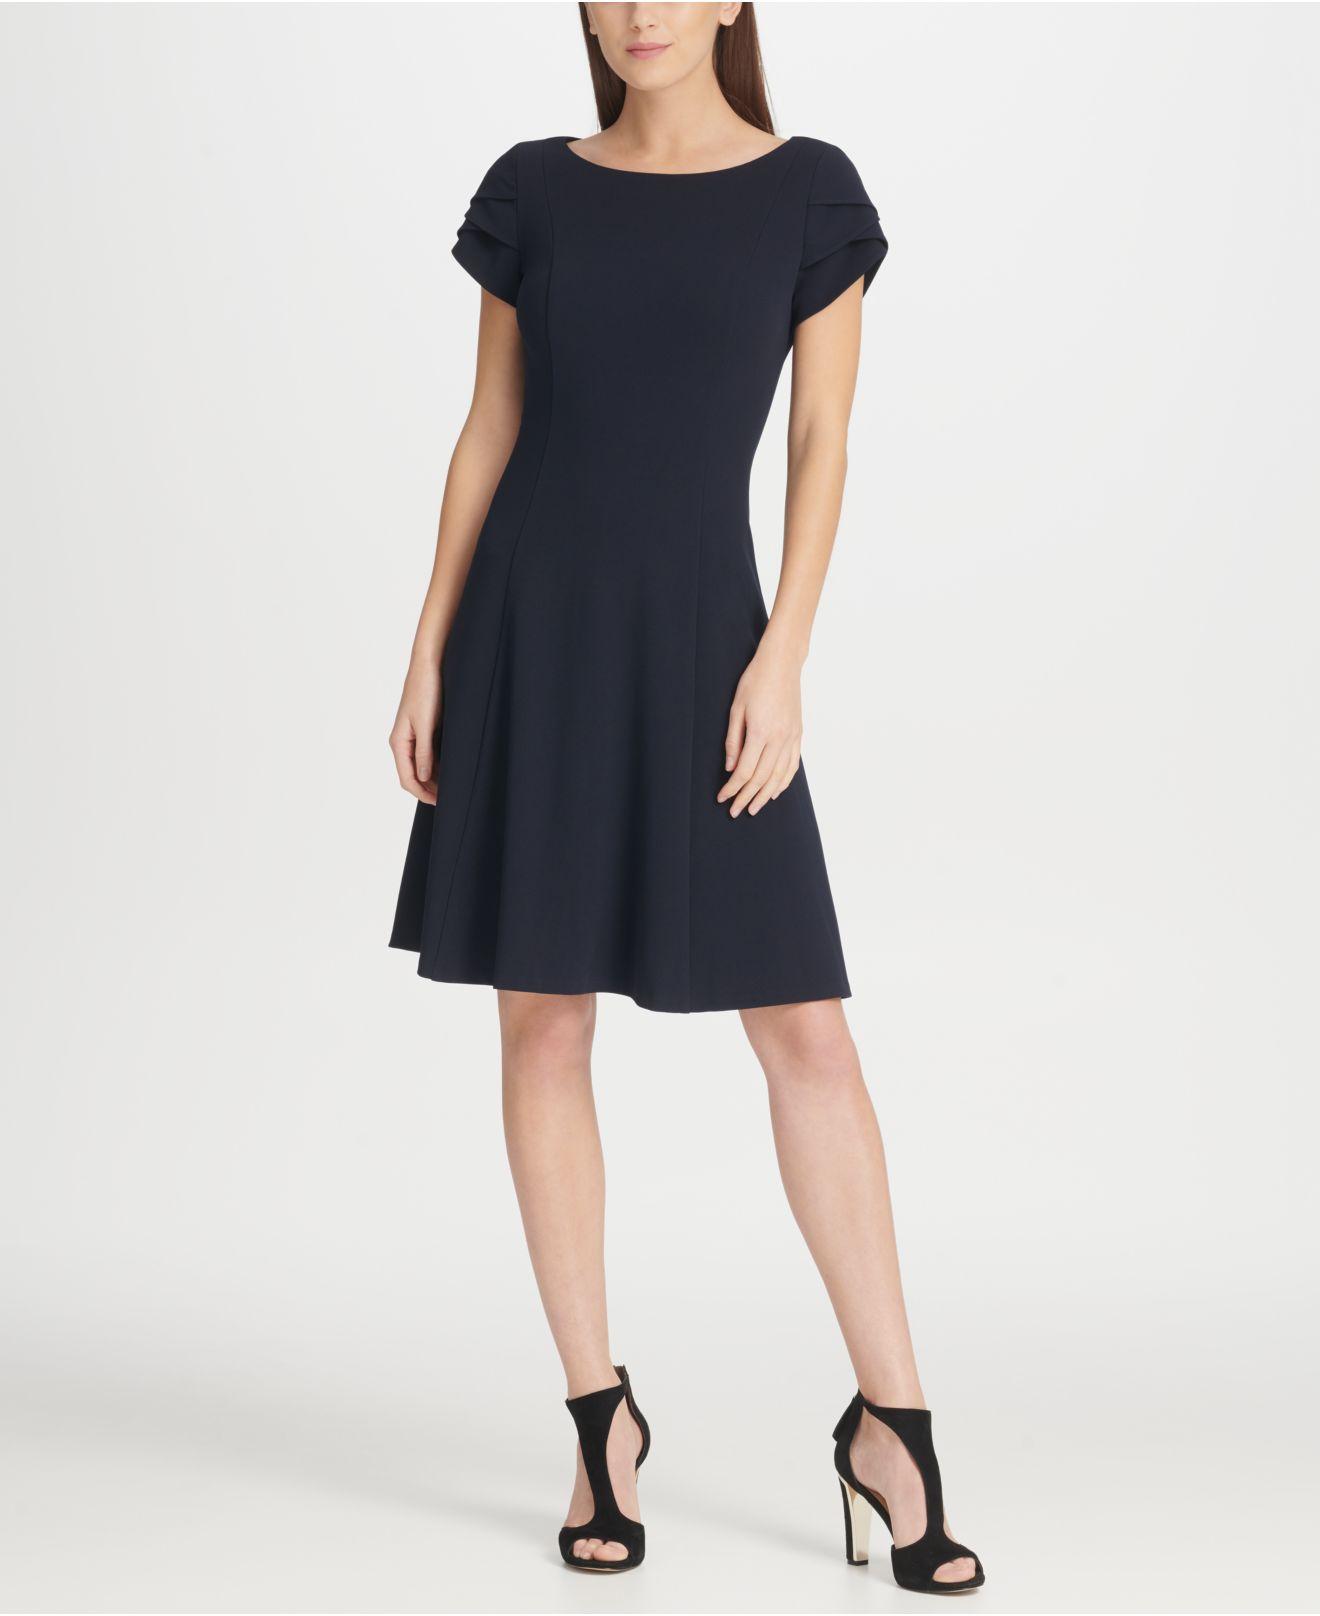 Lyst - DKNY Tulip Sleeve Fit & Flare Dress, Created For Macy's in Blue